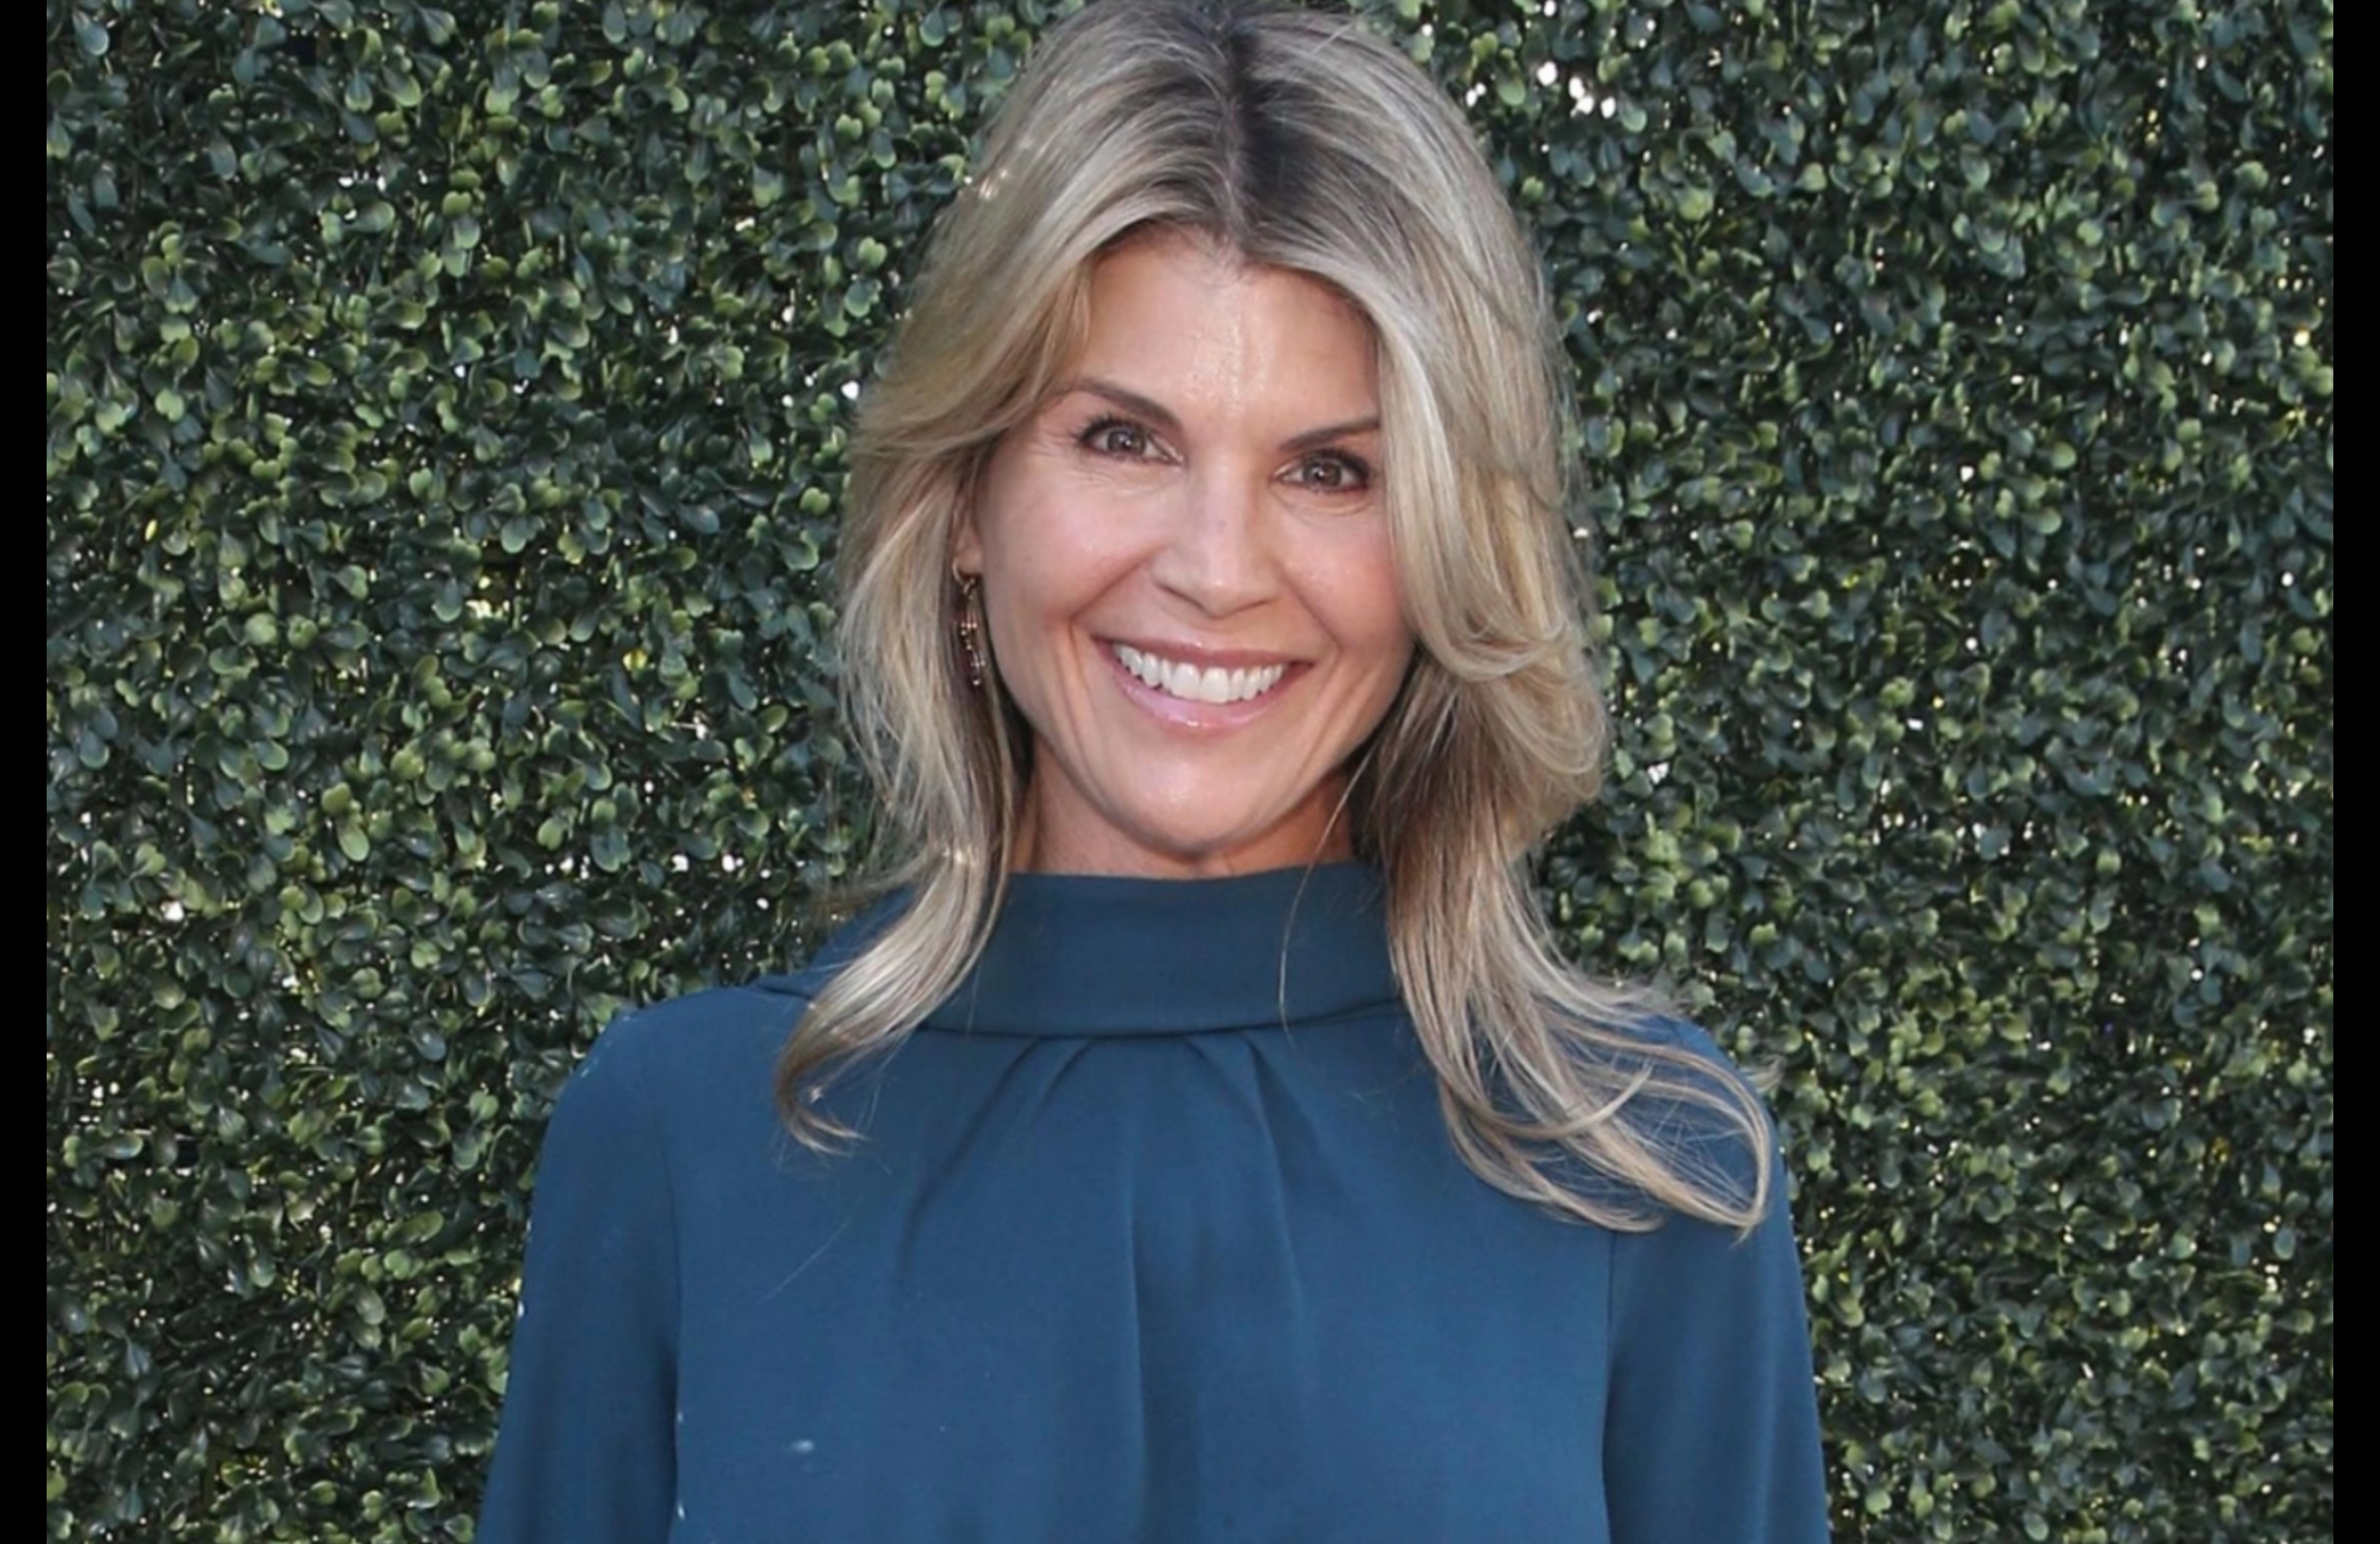 Lori Loughlin Makes It On the Red Carpet for the First Time Since 2019!